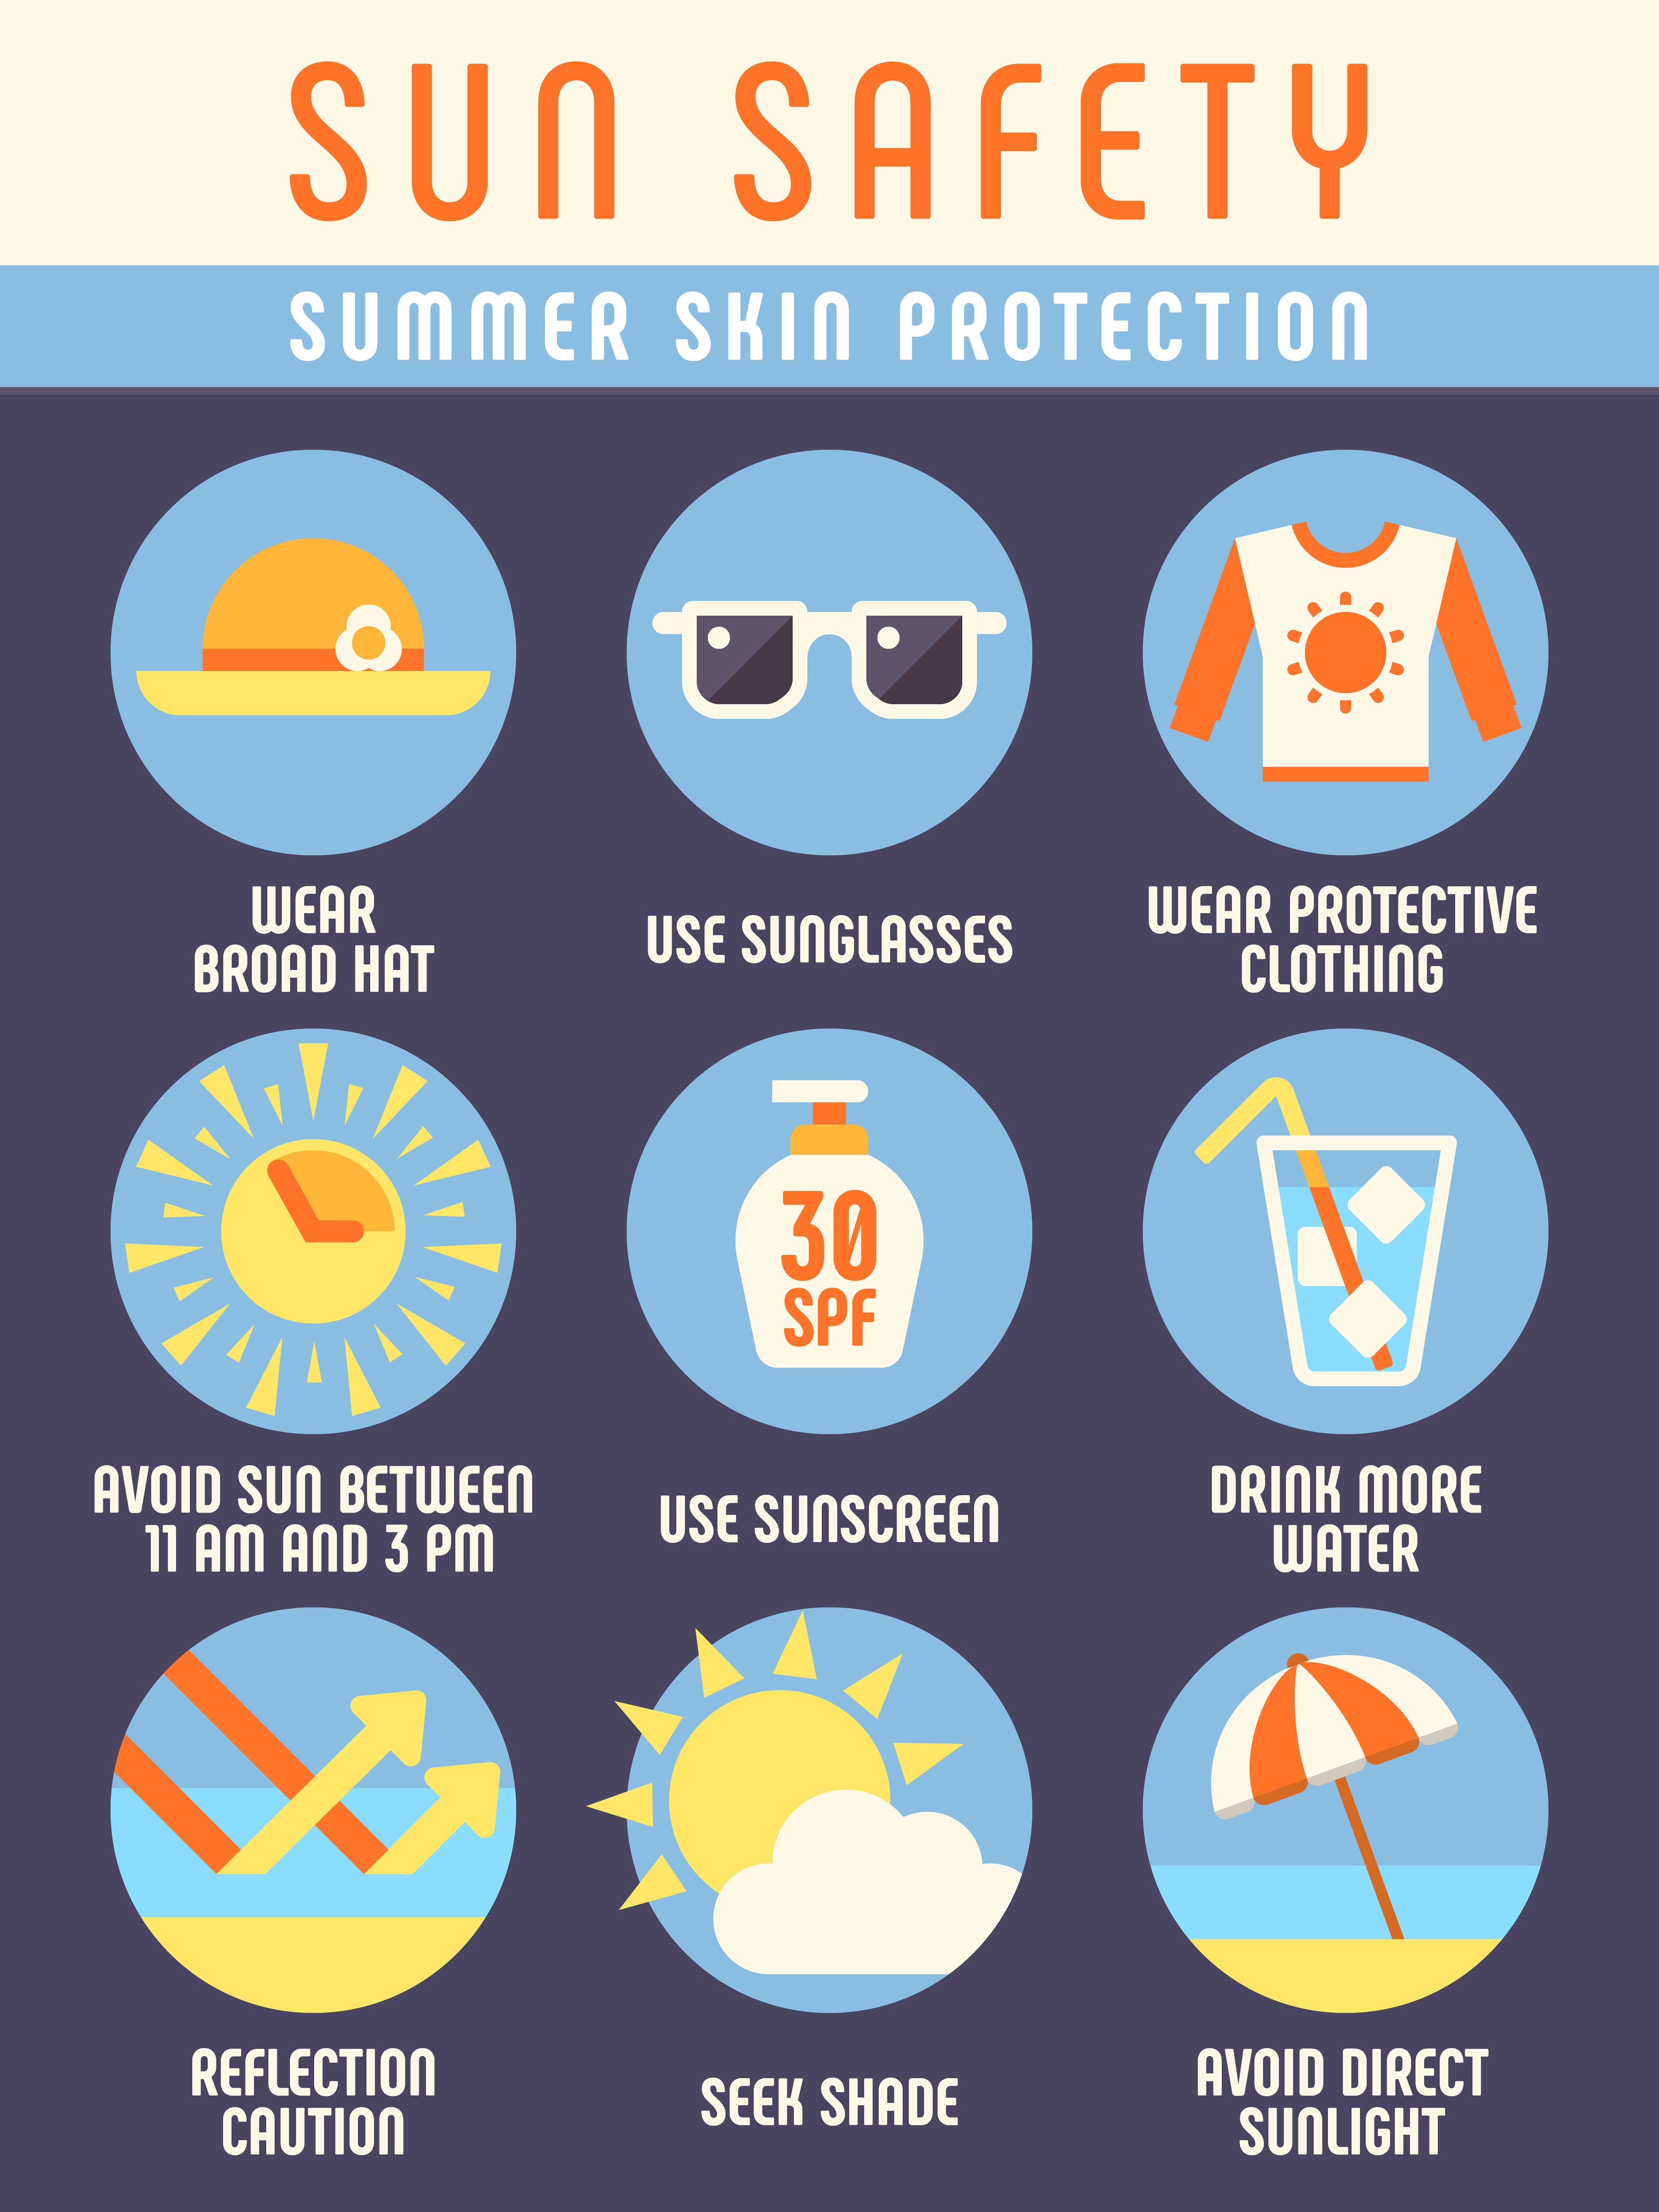 skin protection from summer sun. Safety and protection from sun